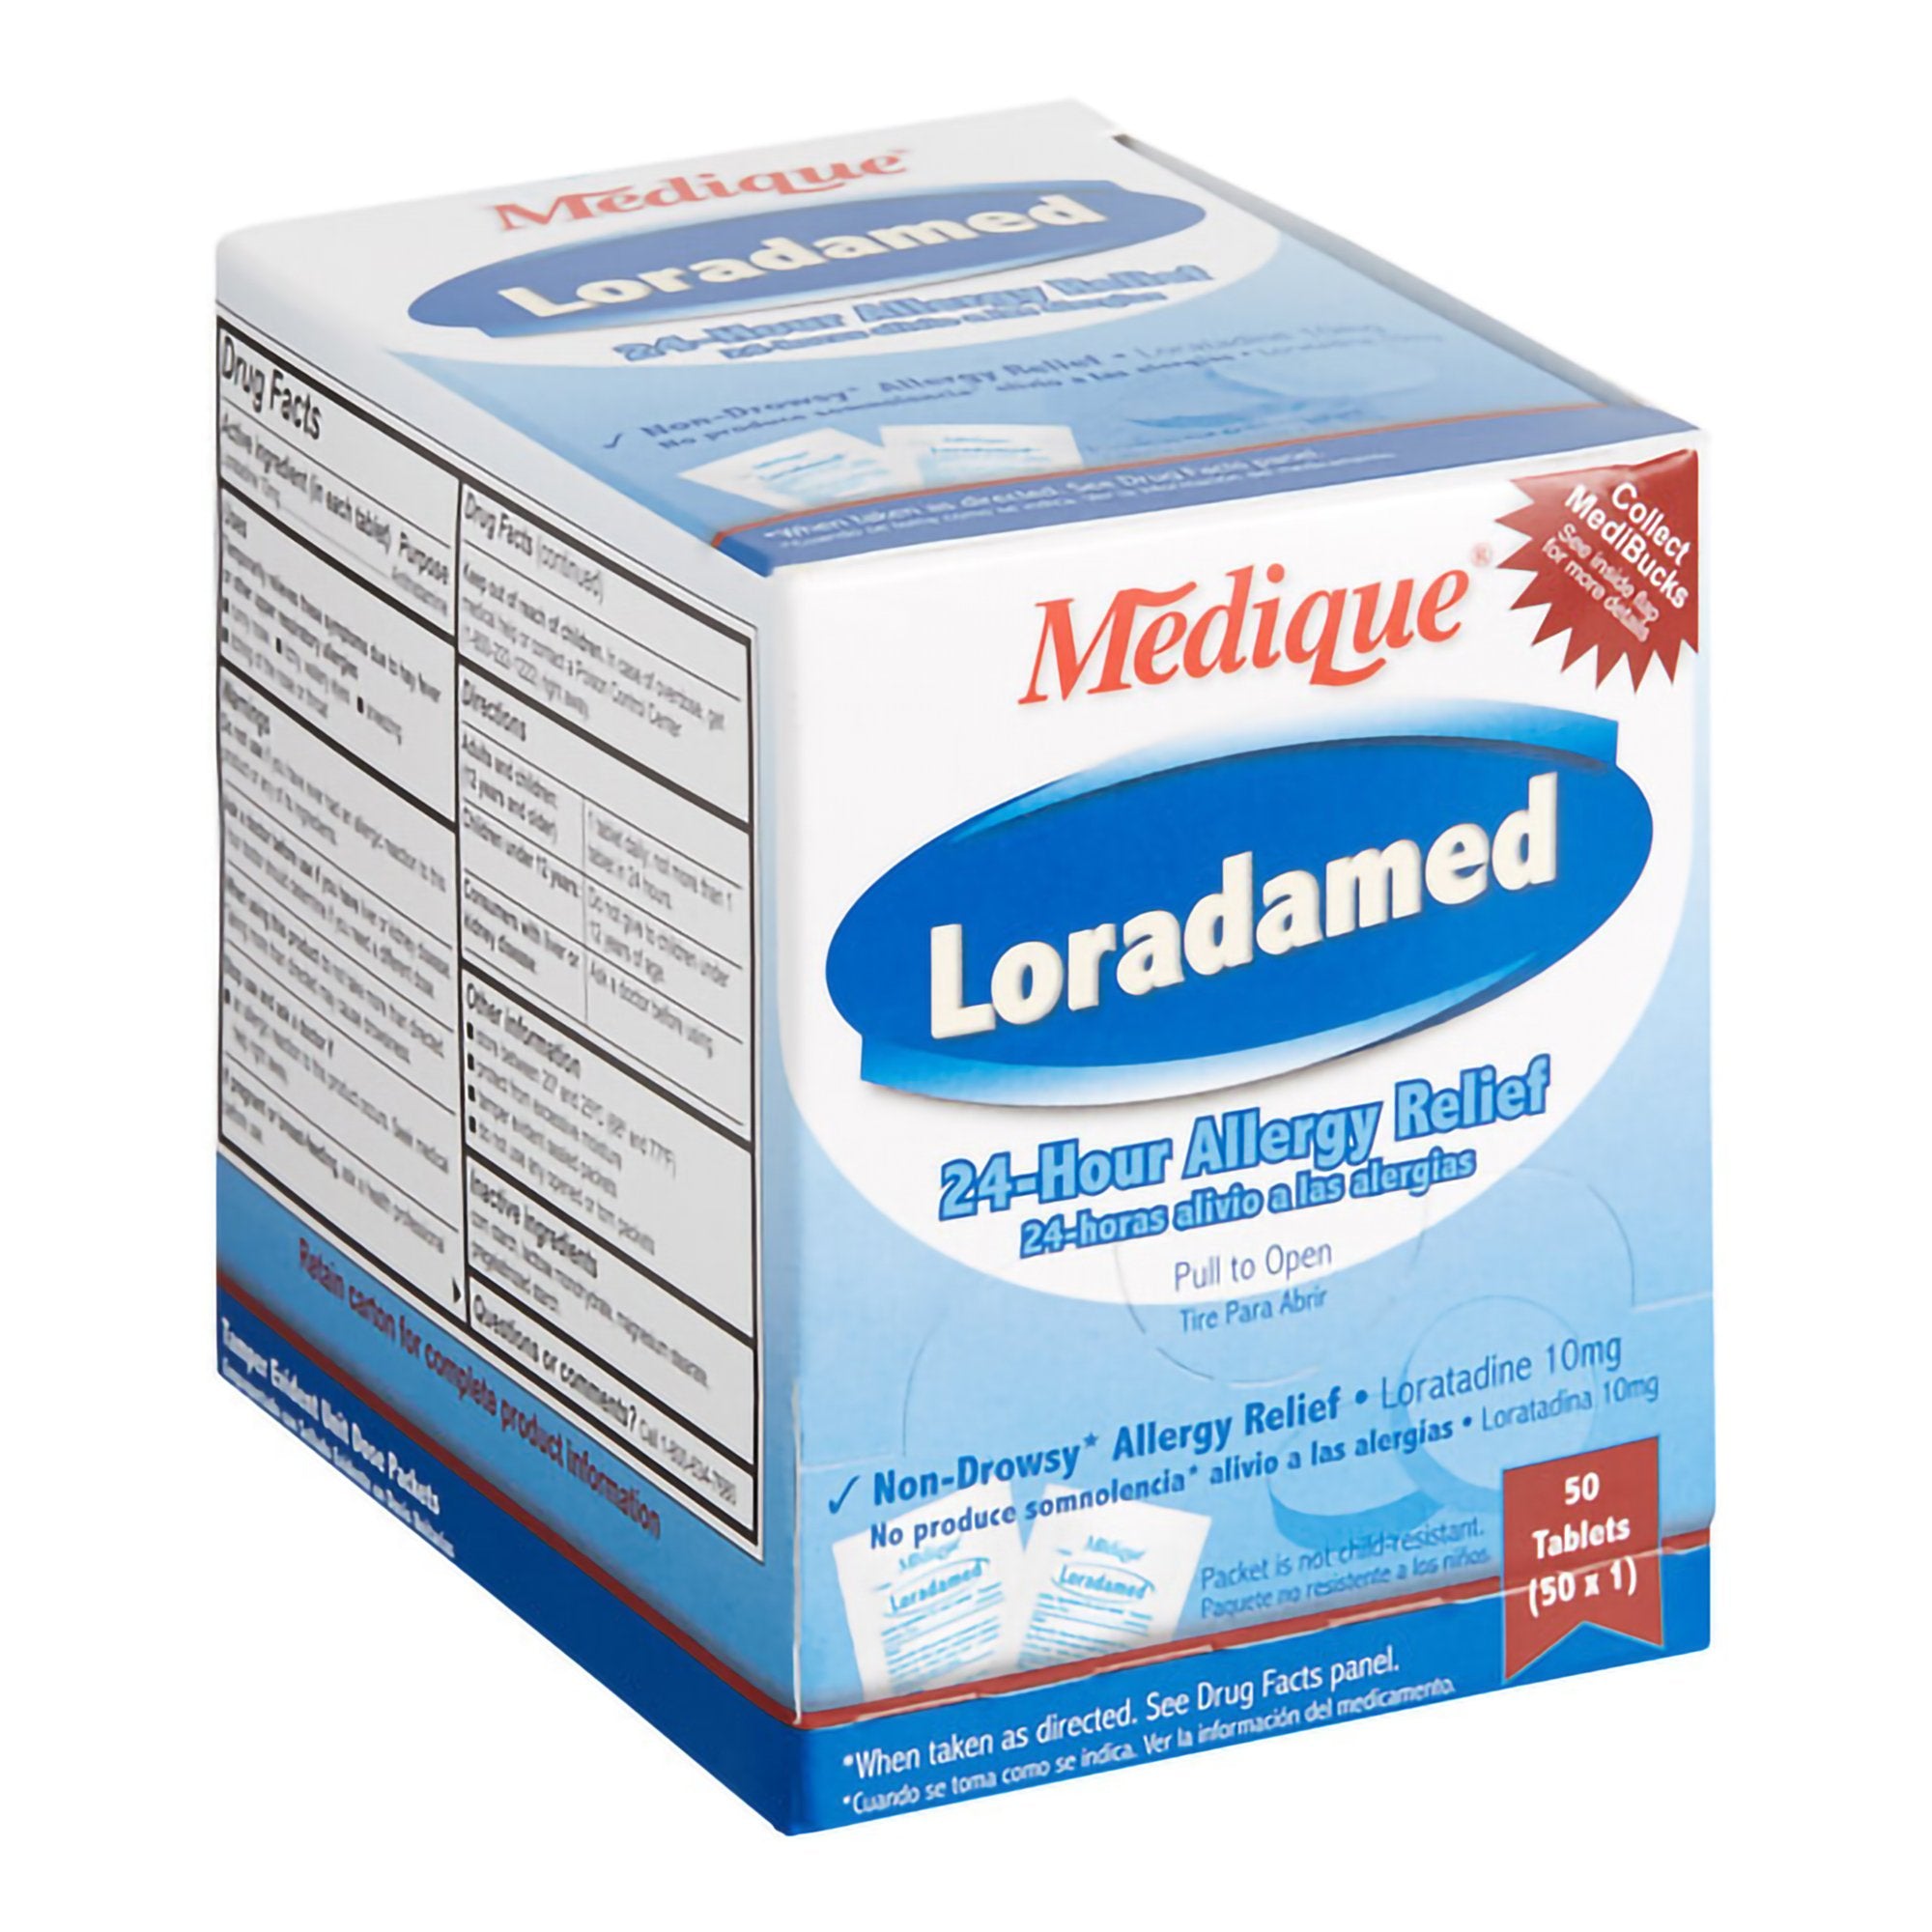 Allergy Relief Loradamed 10 mg Strength Tablet 1 per Box